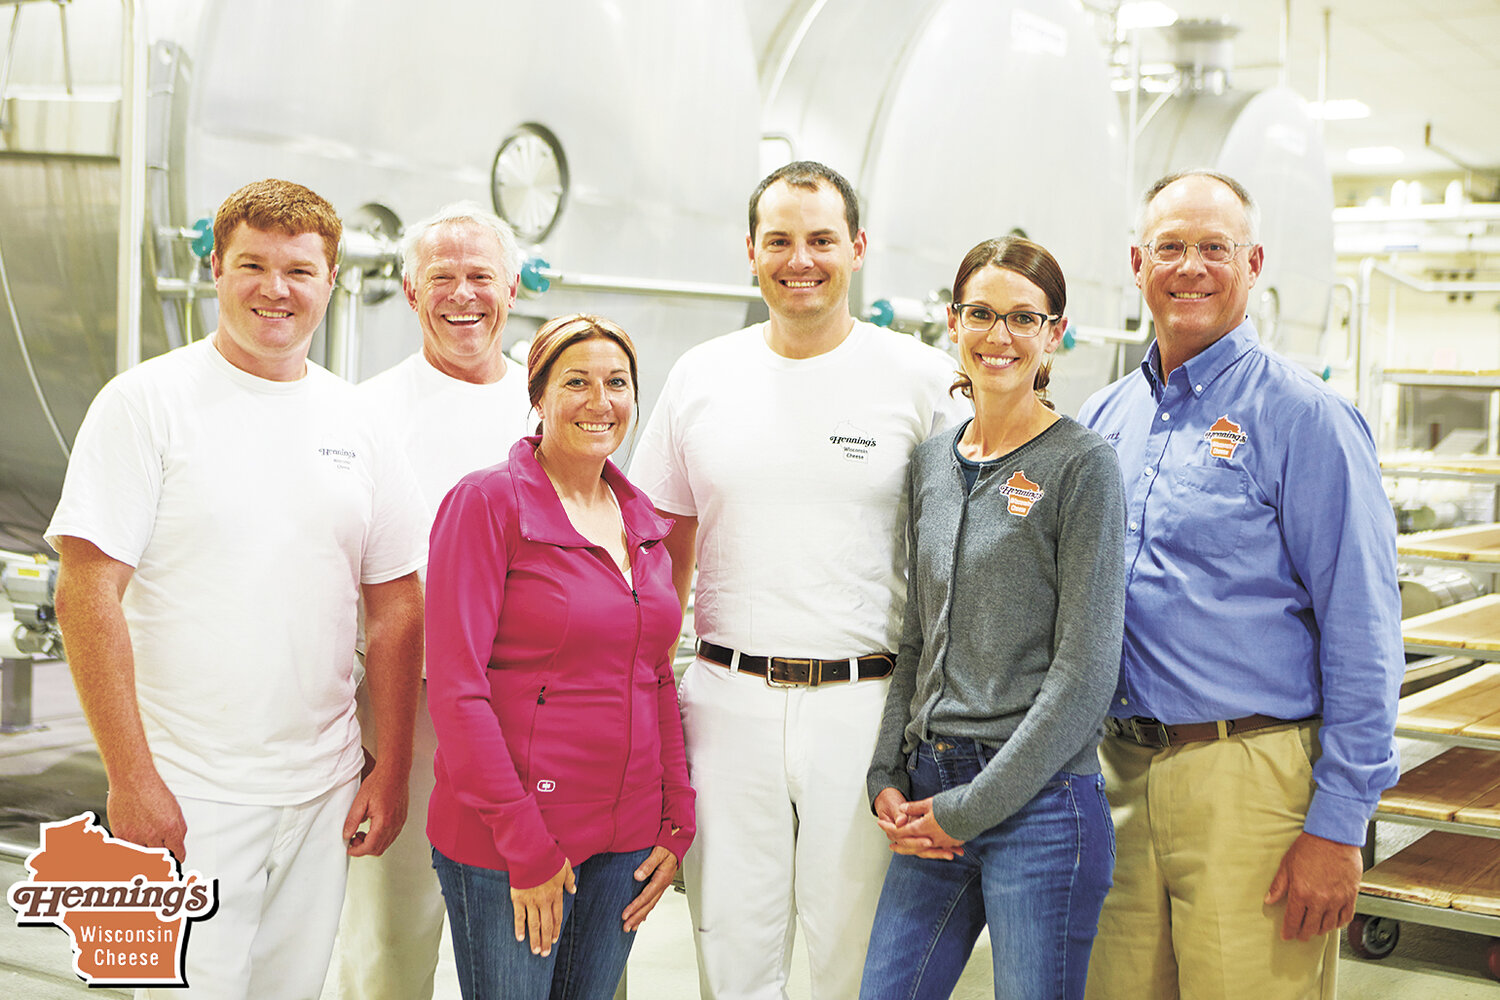 The Henning family — Zachary (from left), Kerry, Mindy Ausloos, Joshua, Rebekah Henschel and Kert — operate Henning’s Cheese where they use the milk of local farms to make 85,000 pounds of cheese per week in Kiel, Wisconsin. Kerry, a Wisconsin master cheesemaker, and Kert are third-generation owners; Joshua and Zachary are fourth-generation licensed cheesemakers; Mindy oversees the retail store, billing and sales; and Rebekah oversees national and local sales, marketing and promotions.